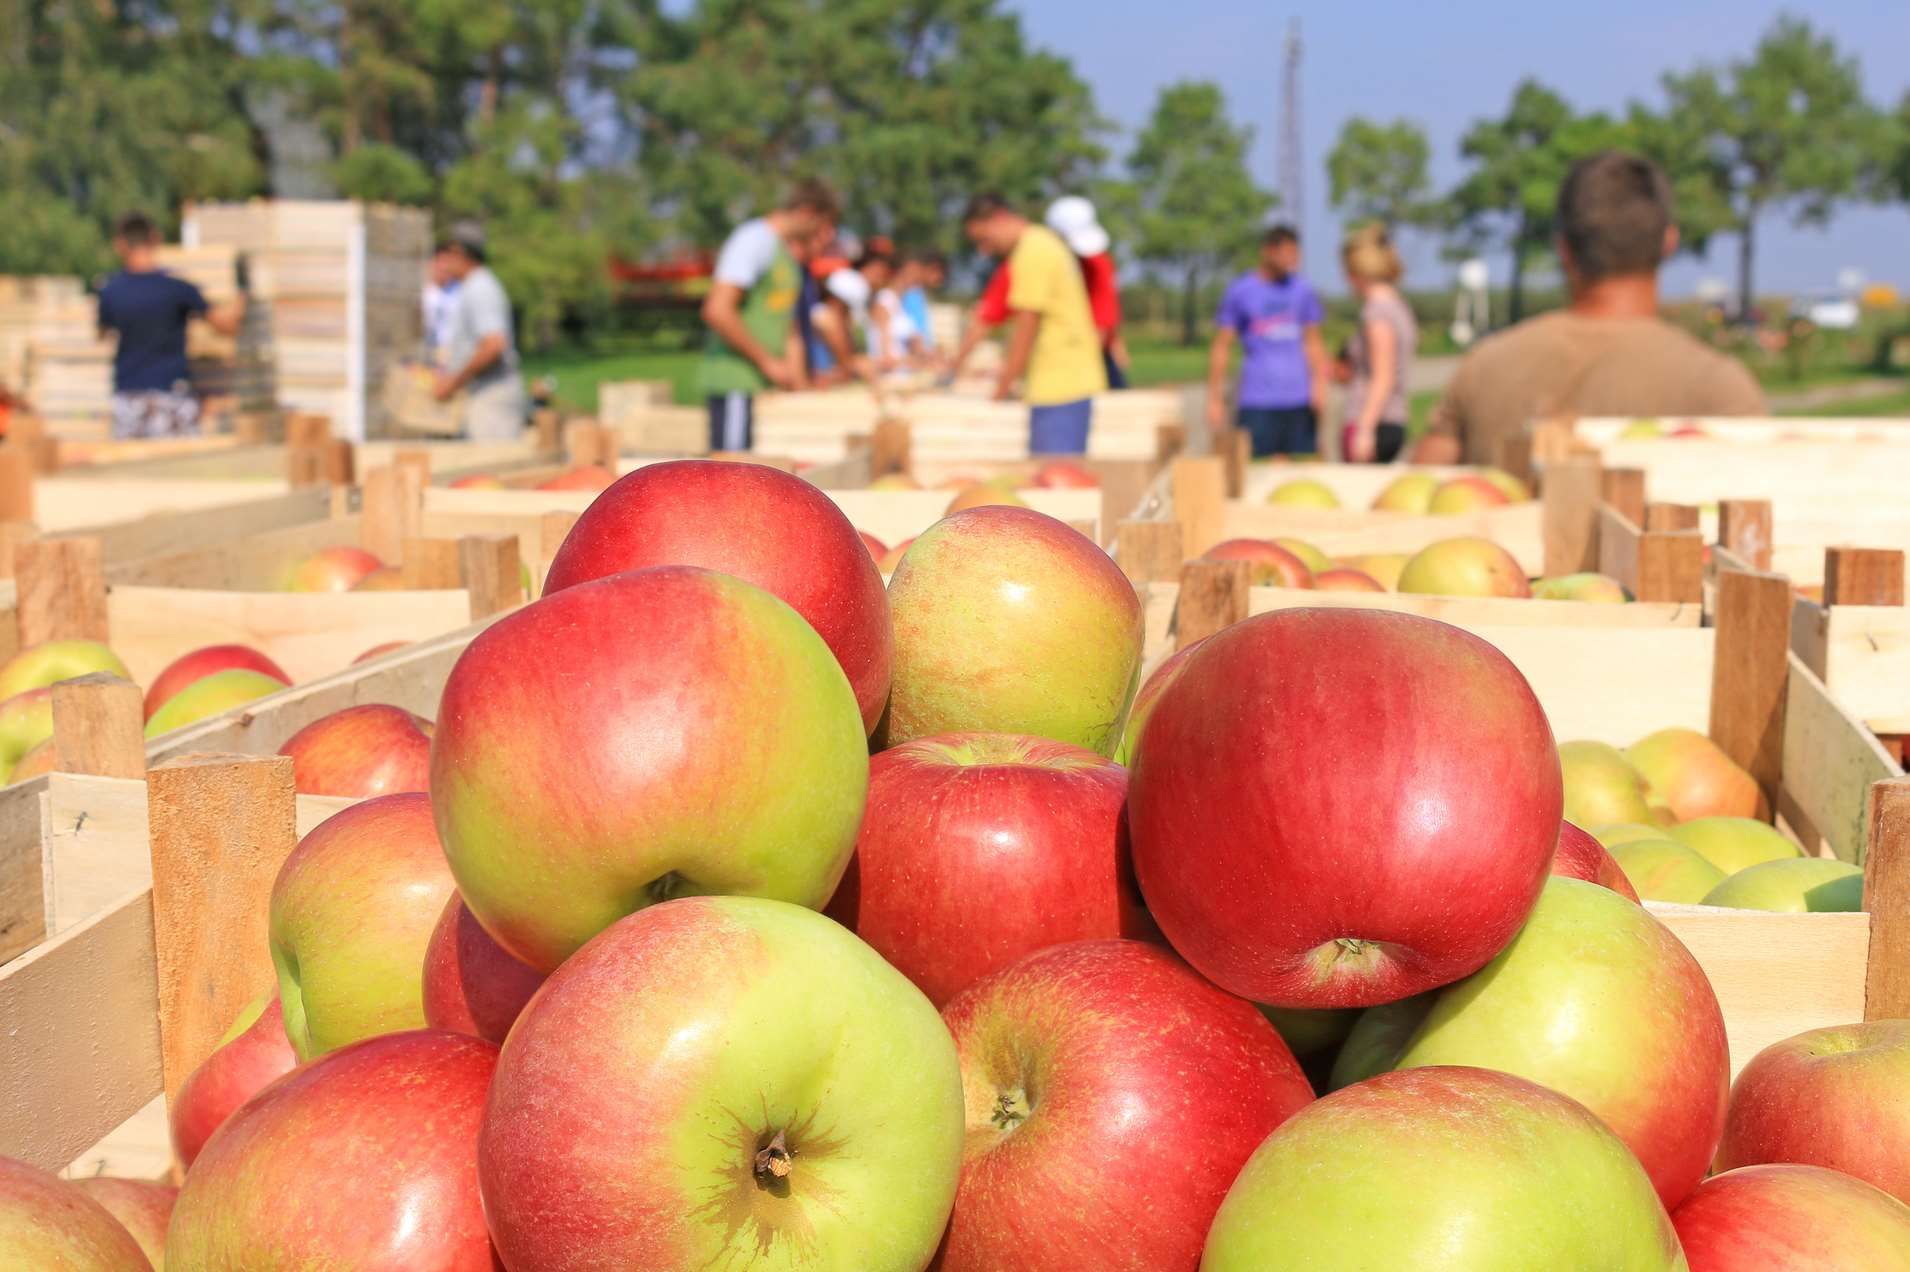 The apple harvest is just coming to an end